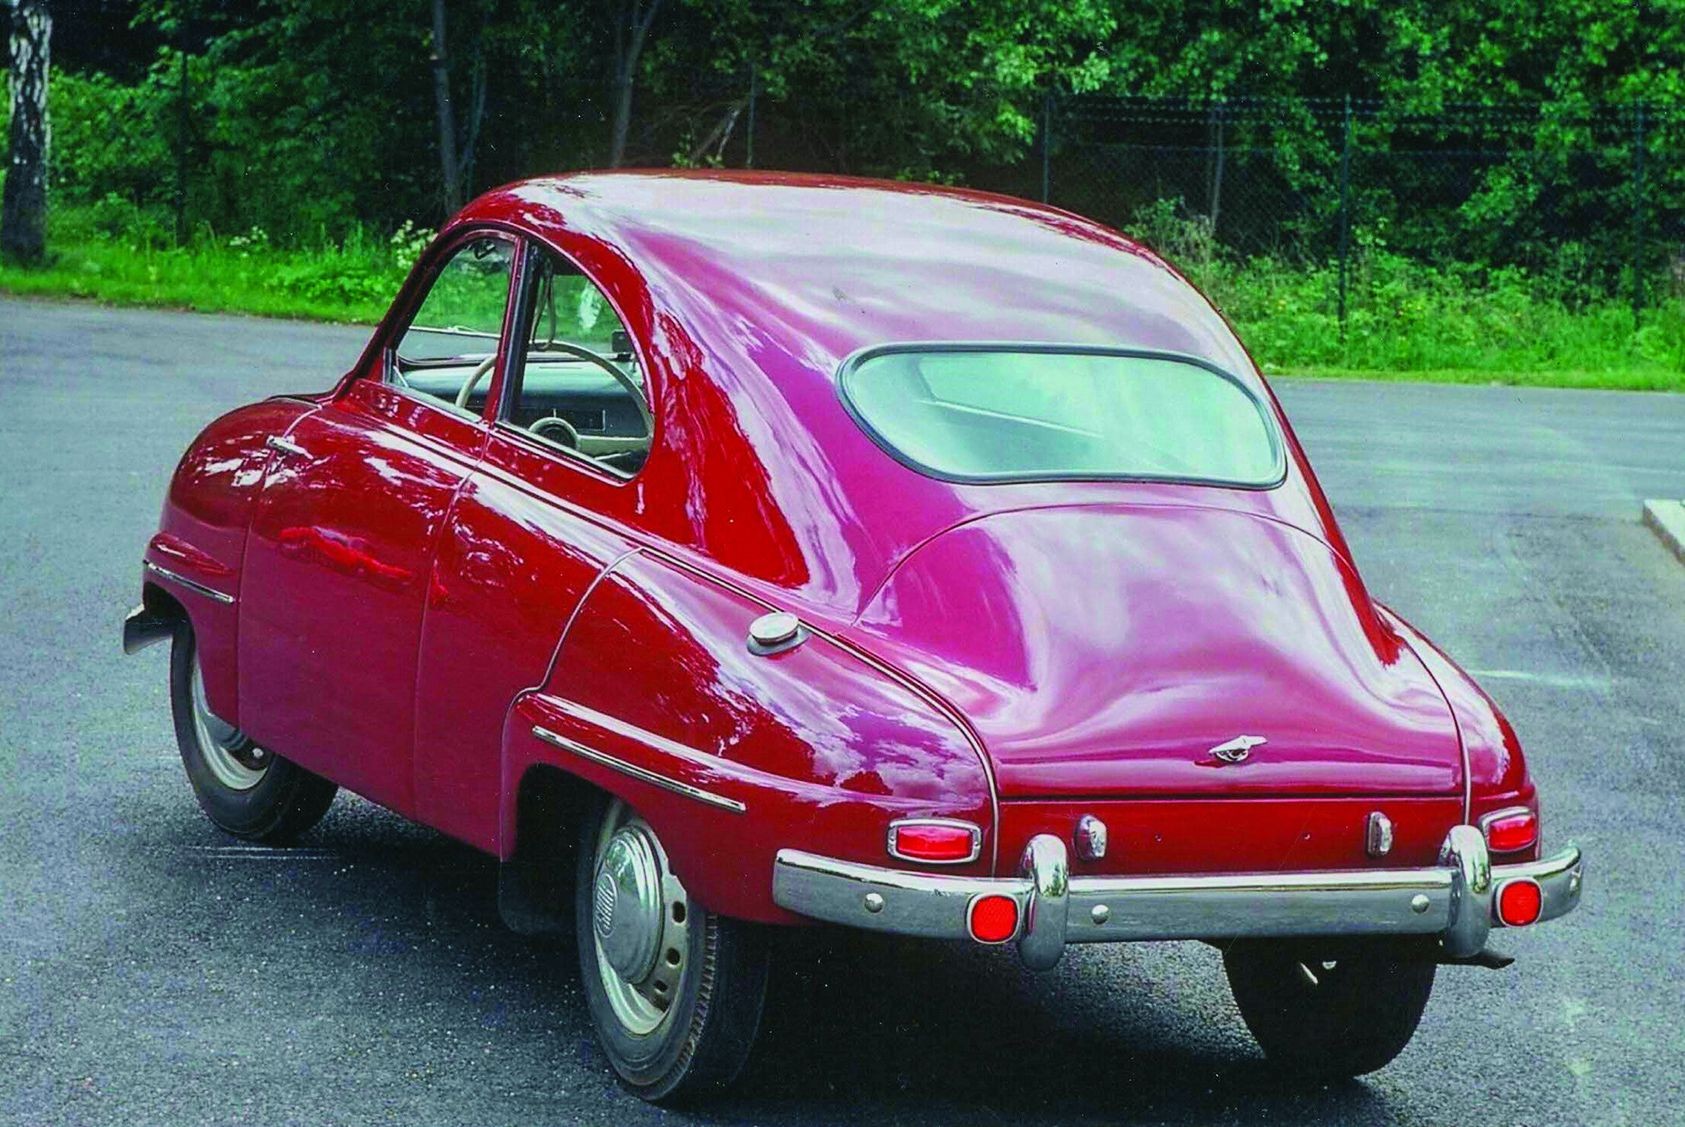 Have You Ever Wondered Why A 1949 Nash 600 And Saab 92 Look Similar?